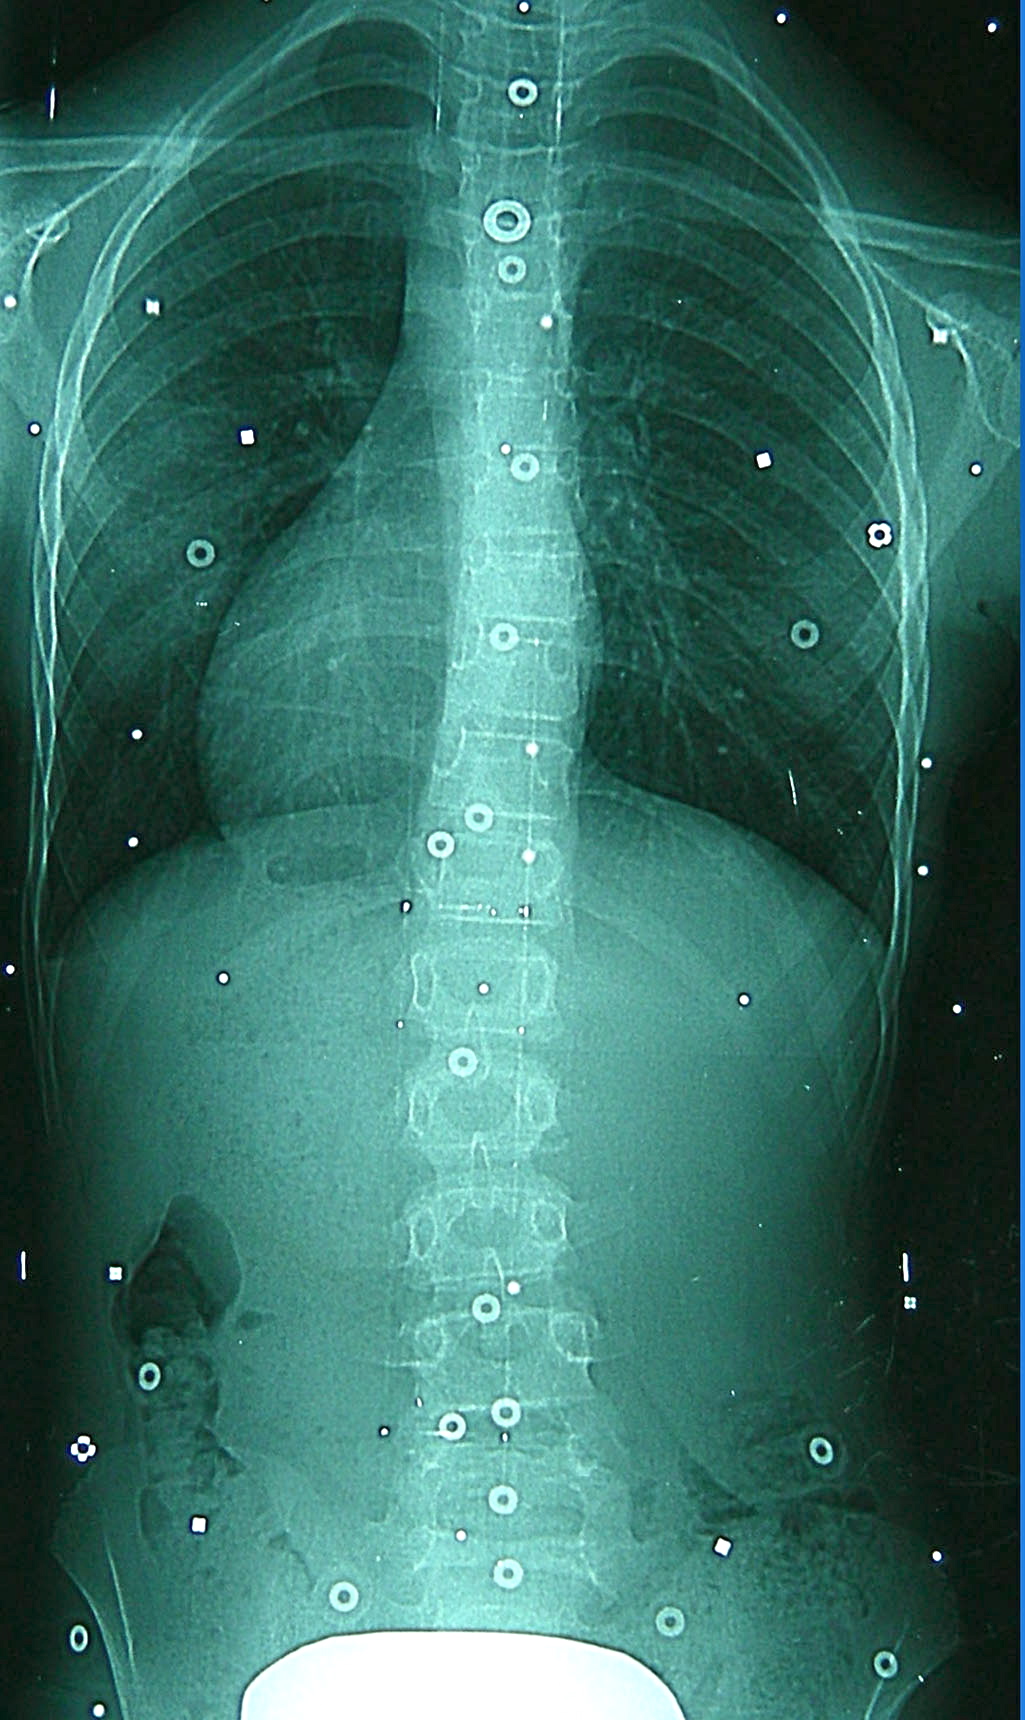 X-ray at removal after 15 months